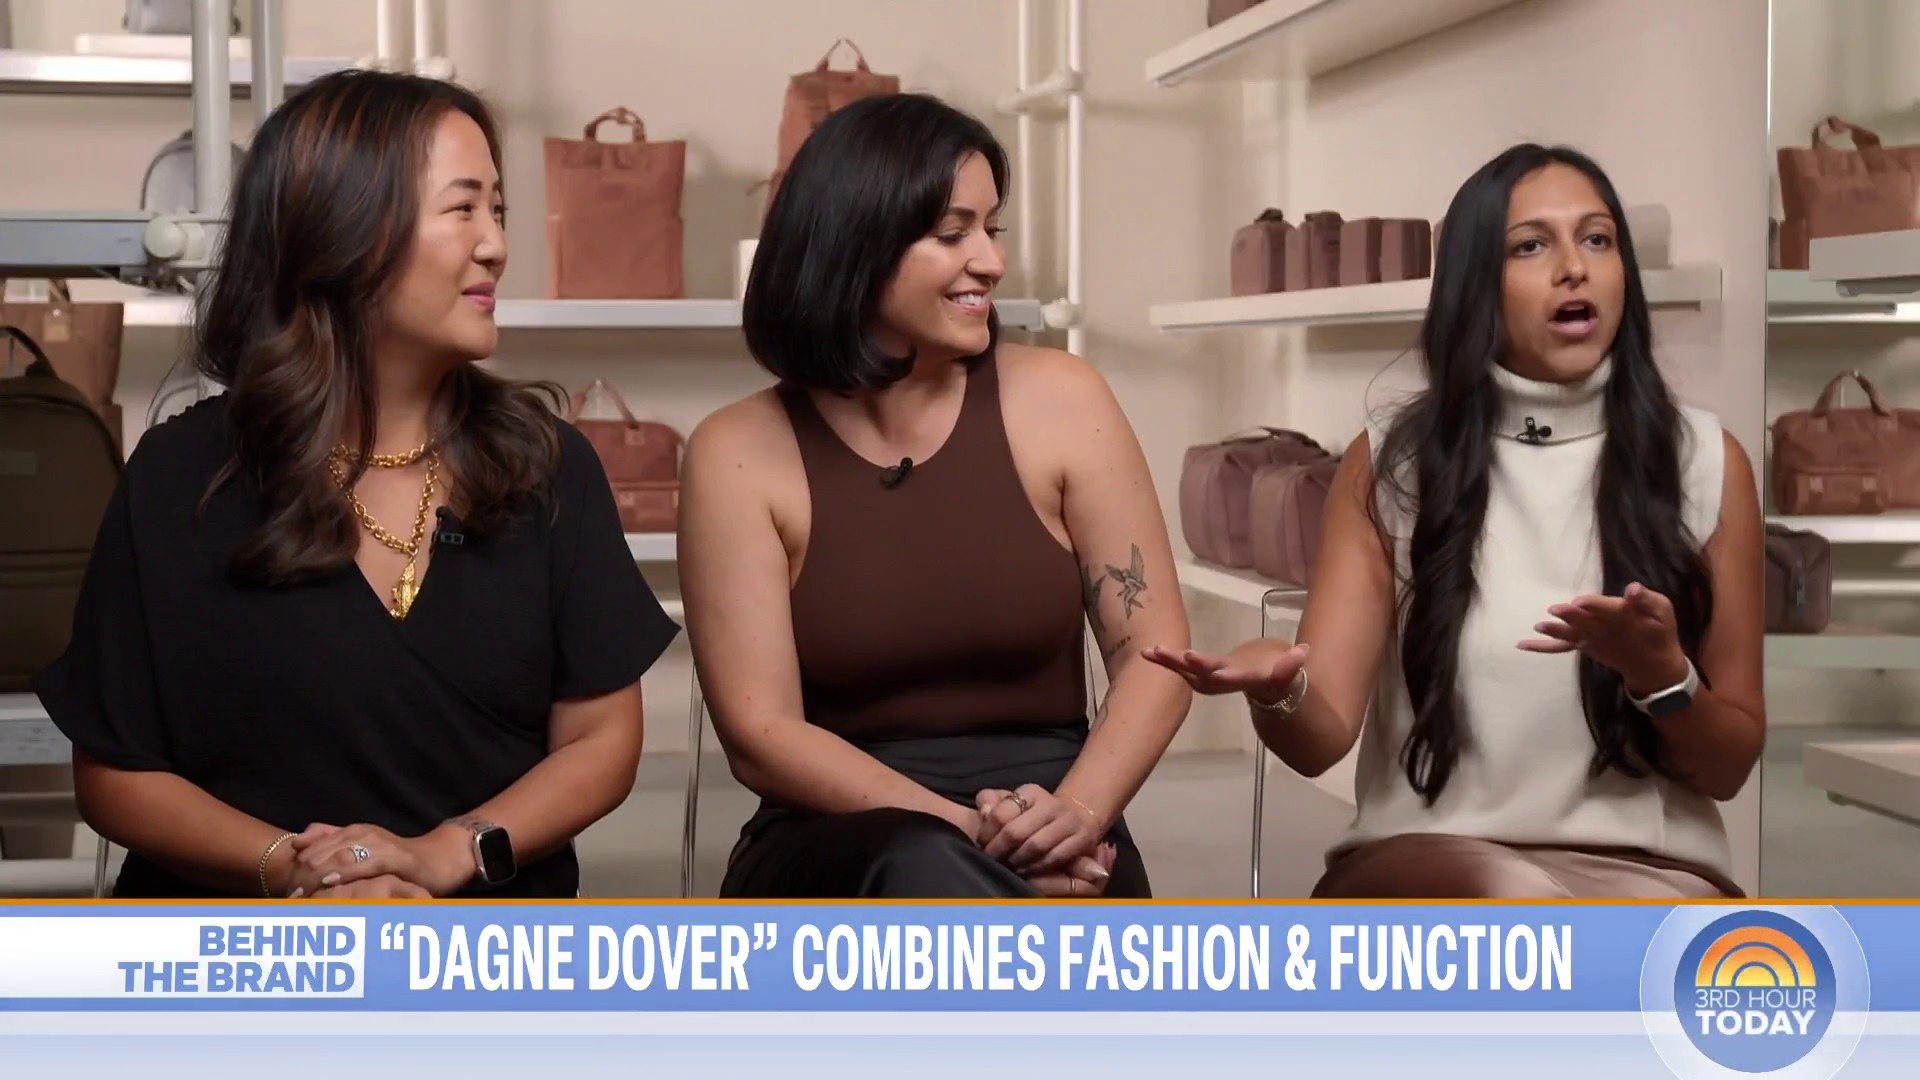 Dagne Dover founders on combining fashion and function for bags